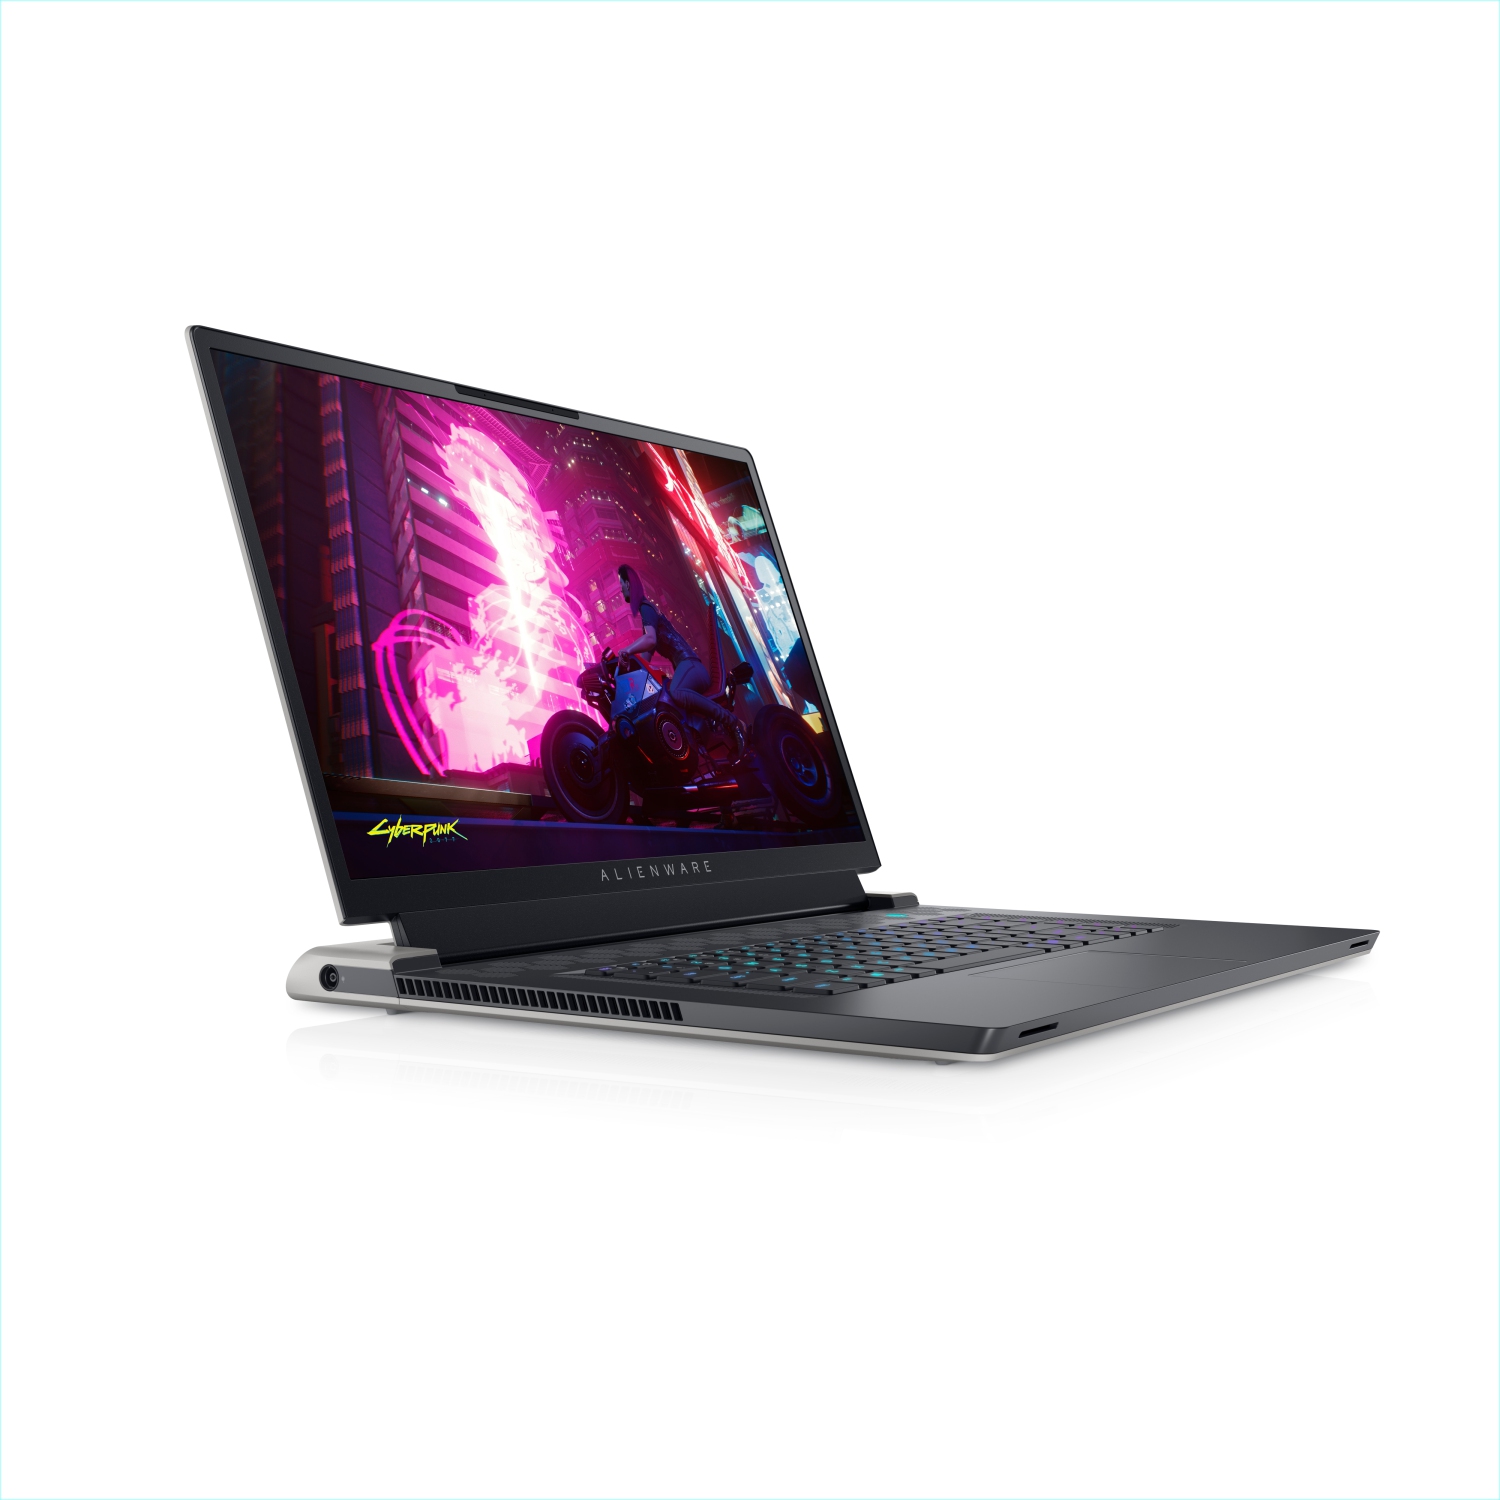 Refurbished (Excellent) - Dell Alienware X17 R1 Gaming Laptop (2021), 17.3" 4K, Core i7, 512GB SSD, 32GB RAM, RTX 3060, 8 Cores @ 4.6 GHz, 11th Gen CPU Certified